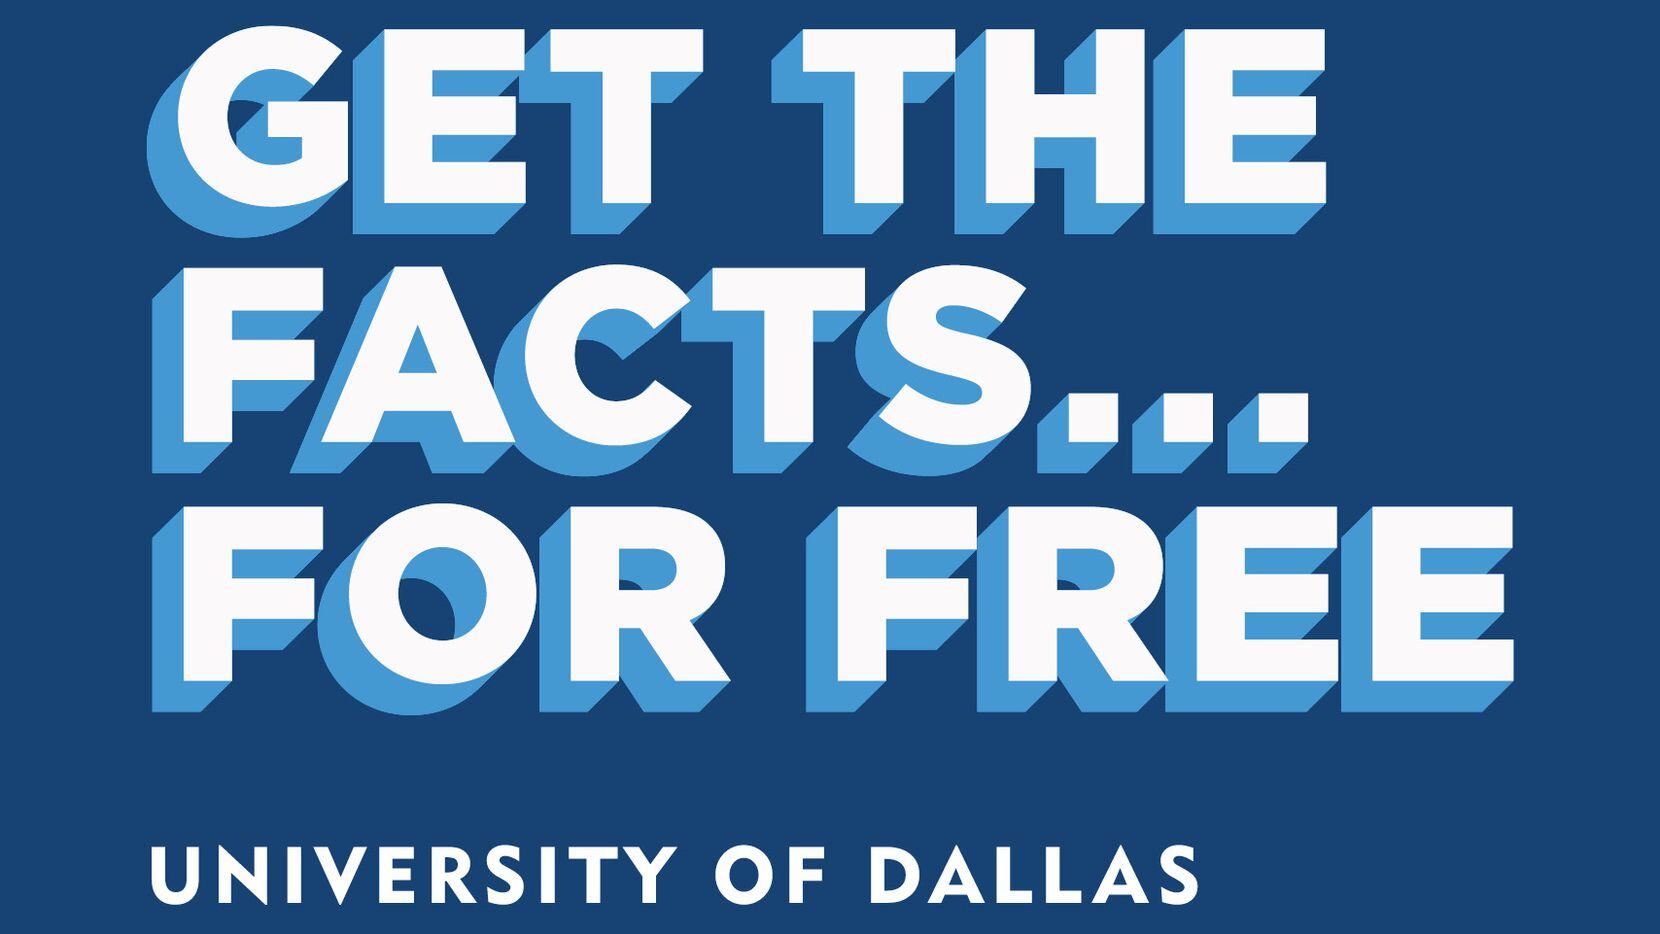 All University of Dallas students will receive free access to the Dallas Morning News for...